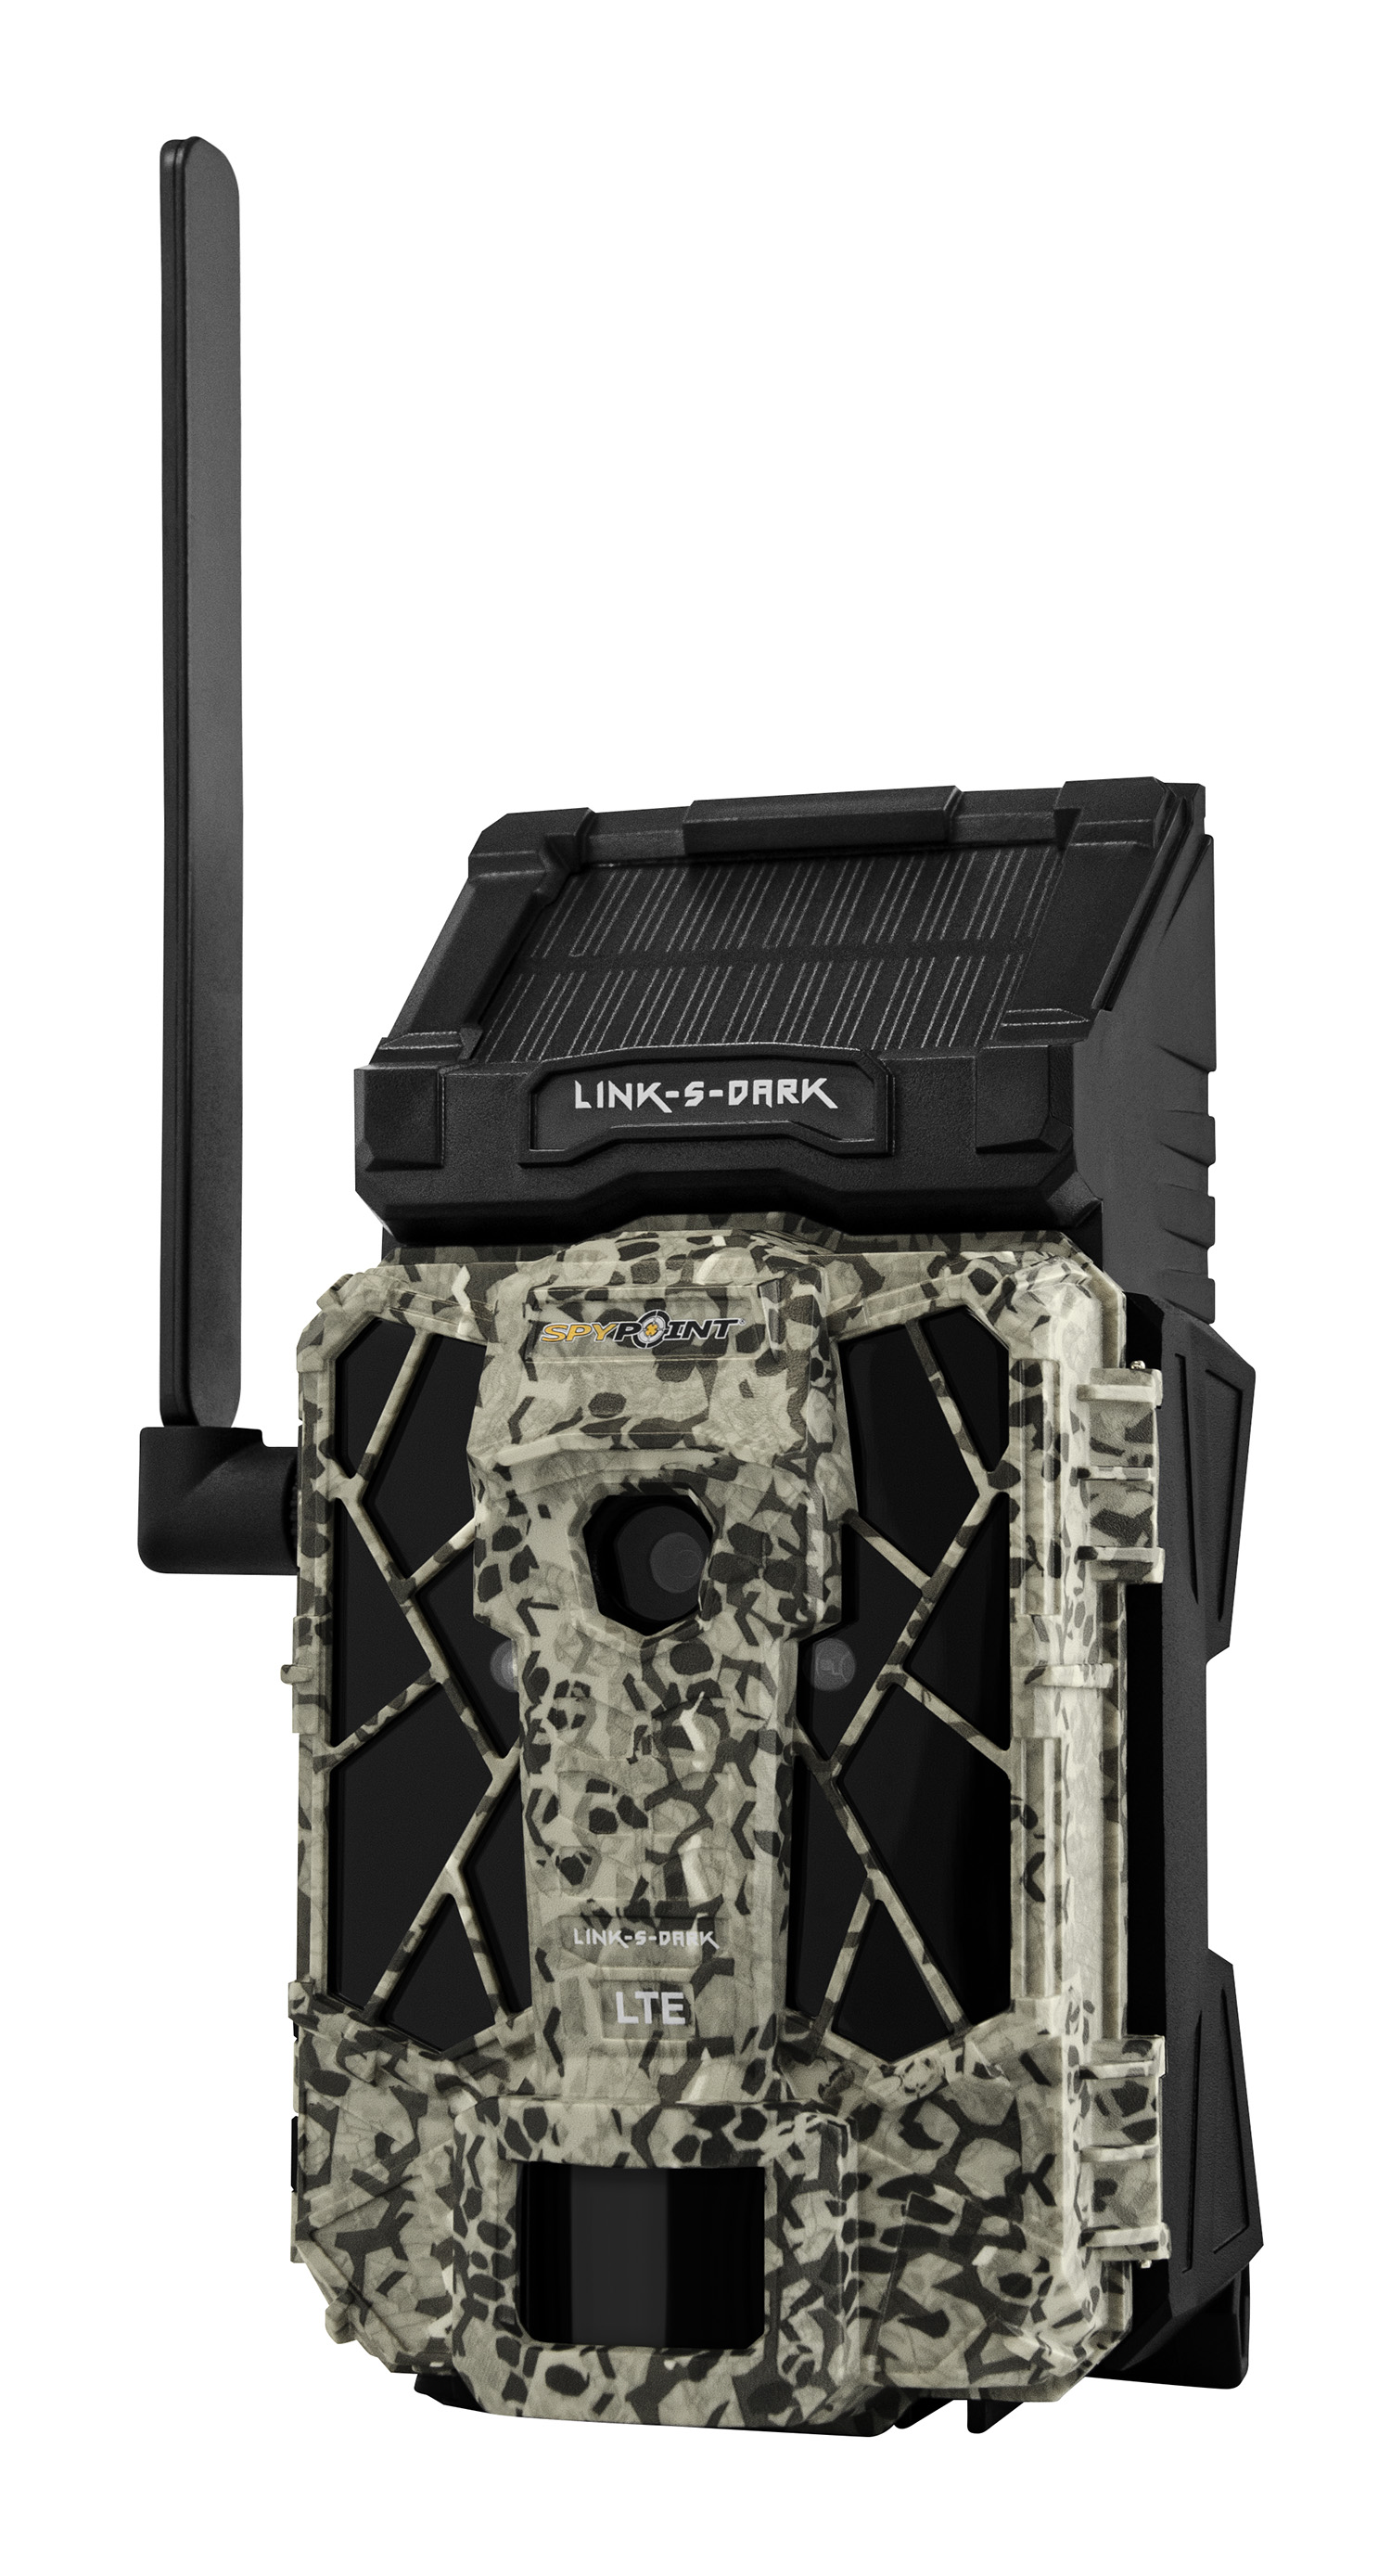 SPYPOINT TRAIL CAM SOLAR LINK DARK AT&T 12MP BLACKOUT CAMO